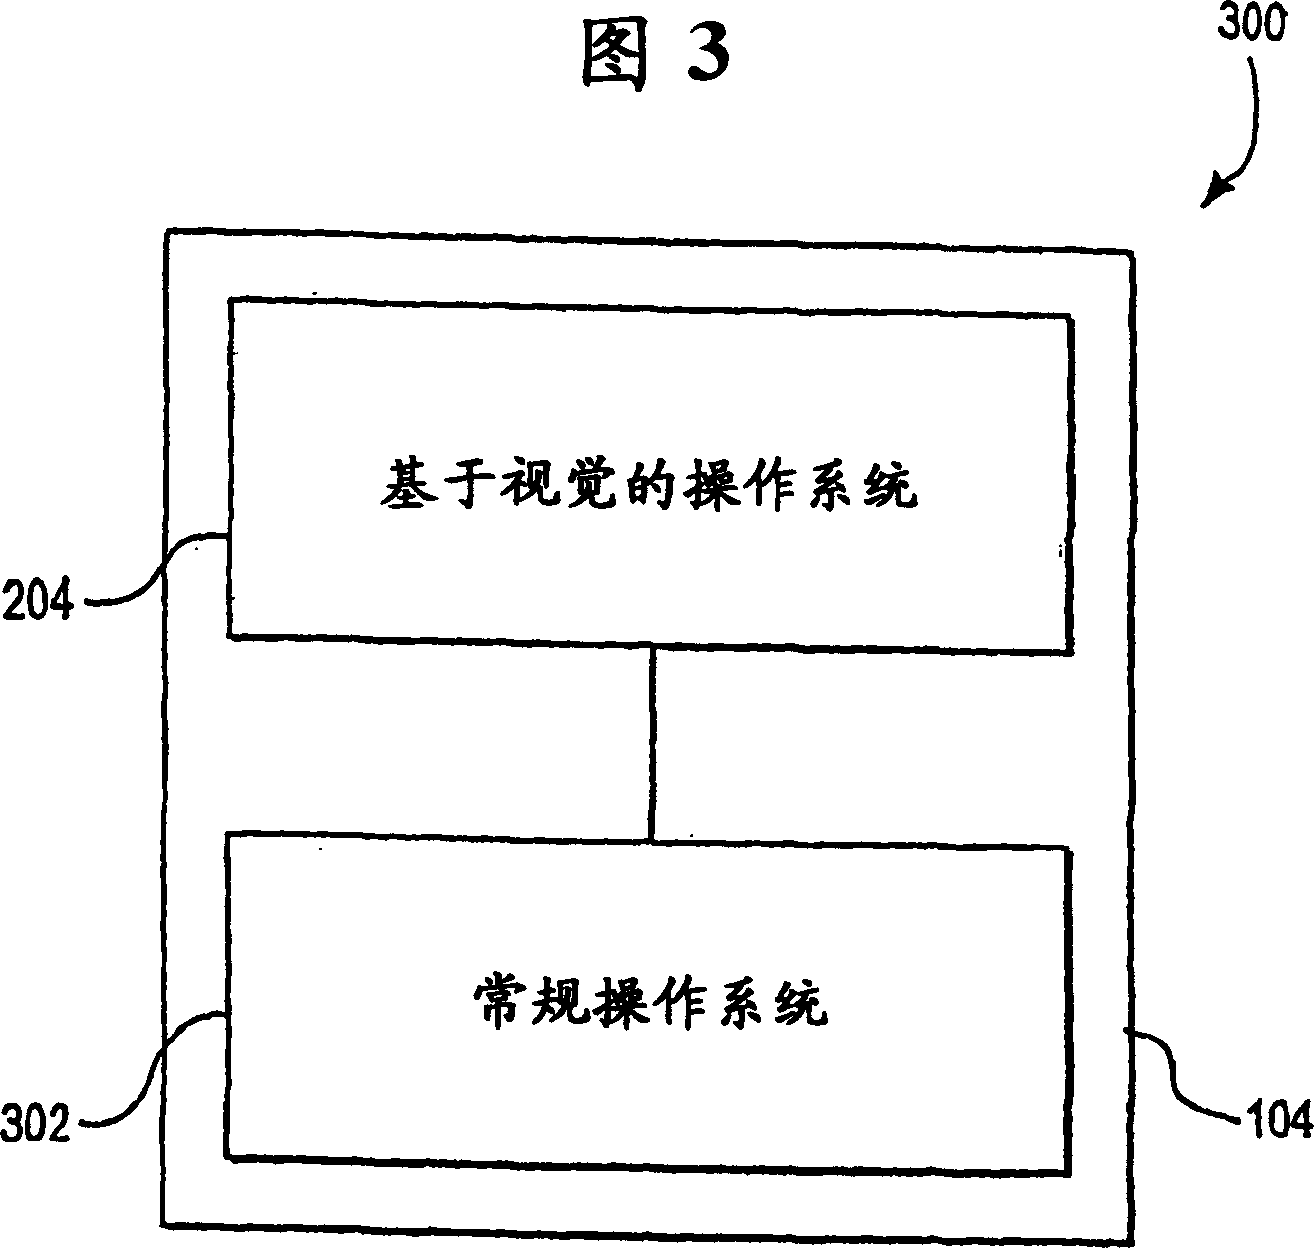 Vision-based operating method and system